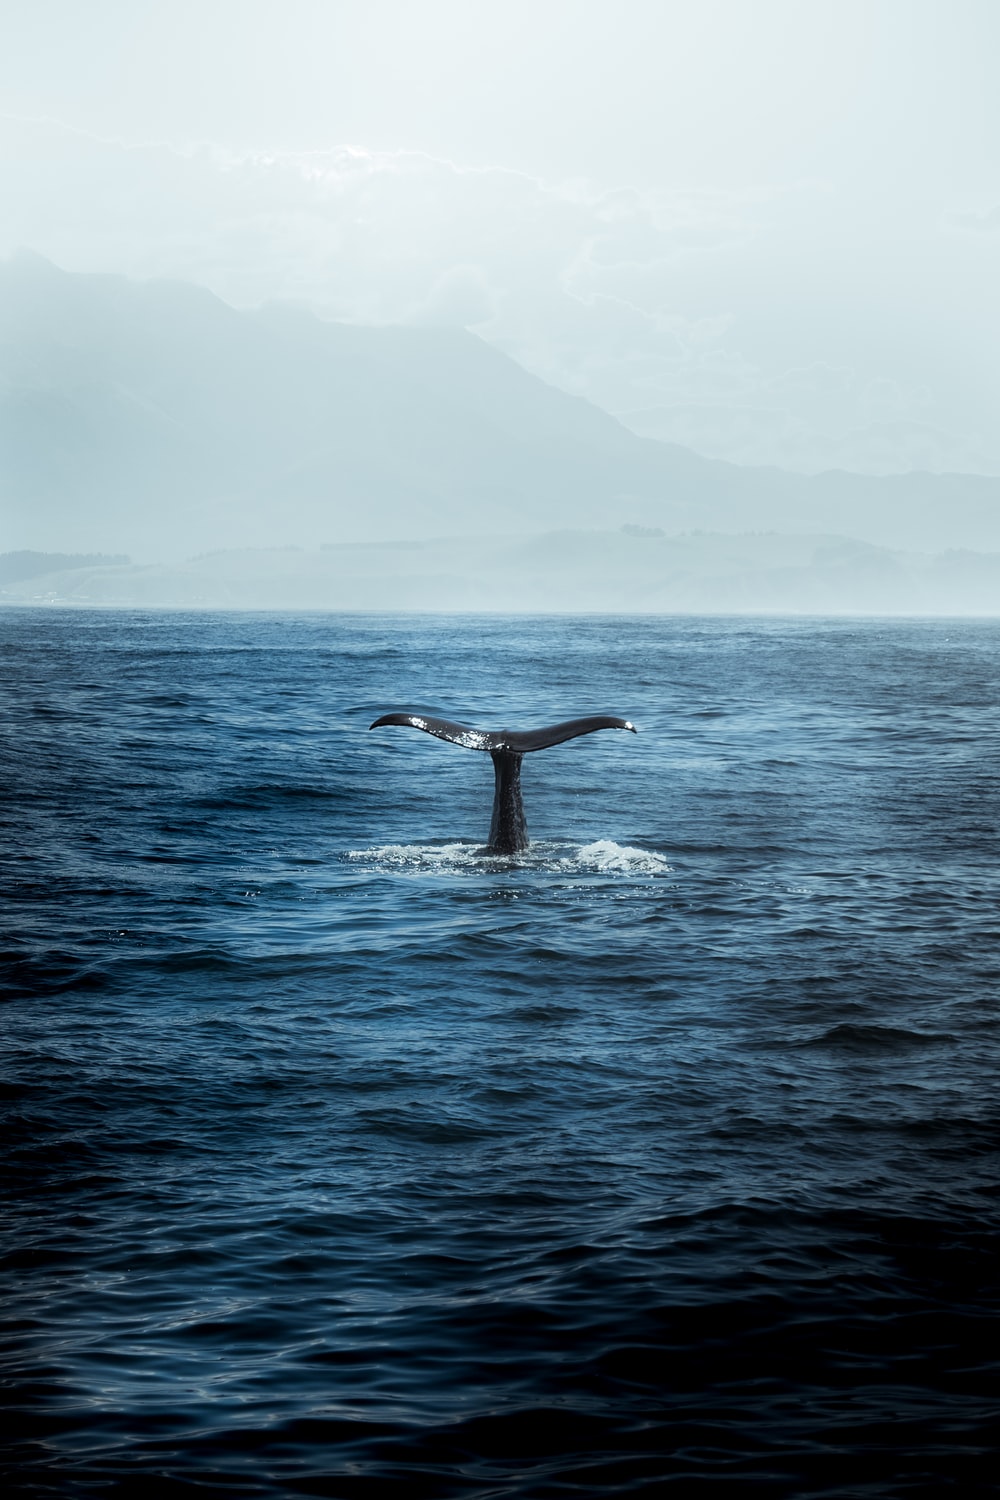 blue whale in body of water photo